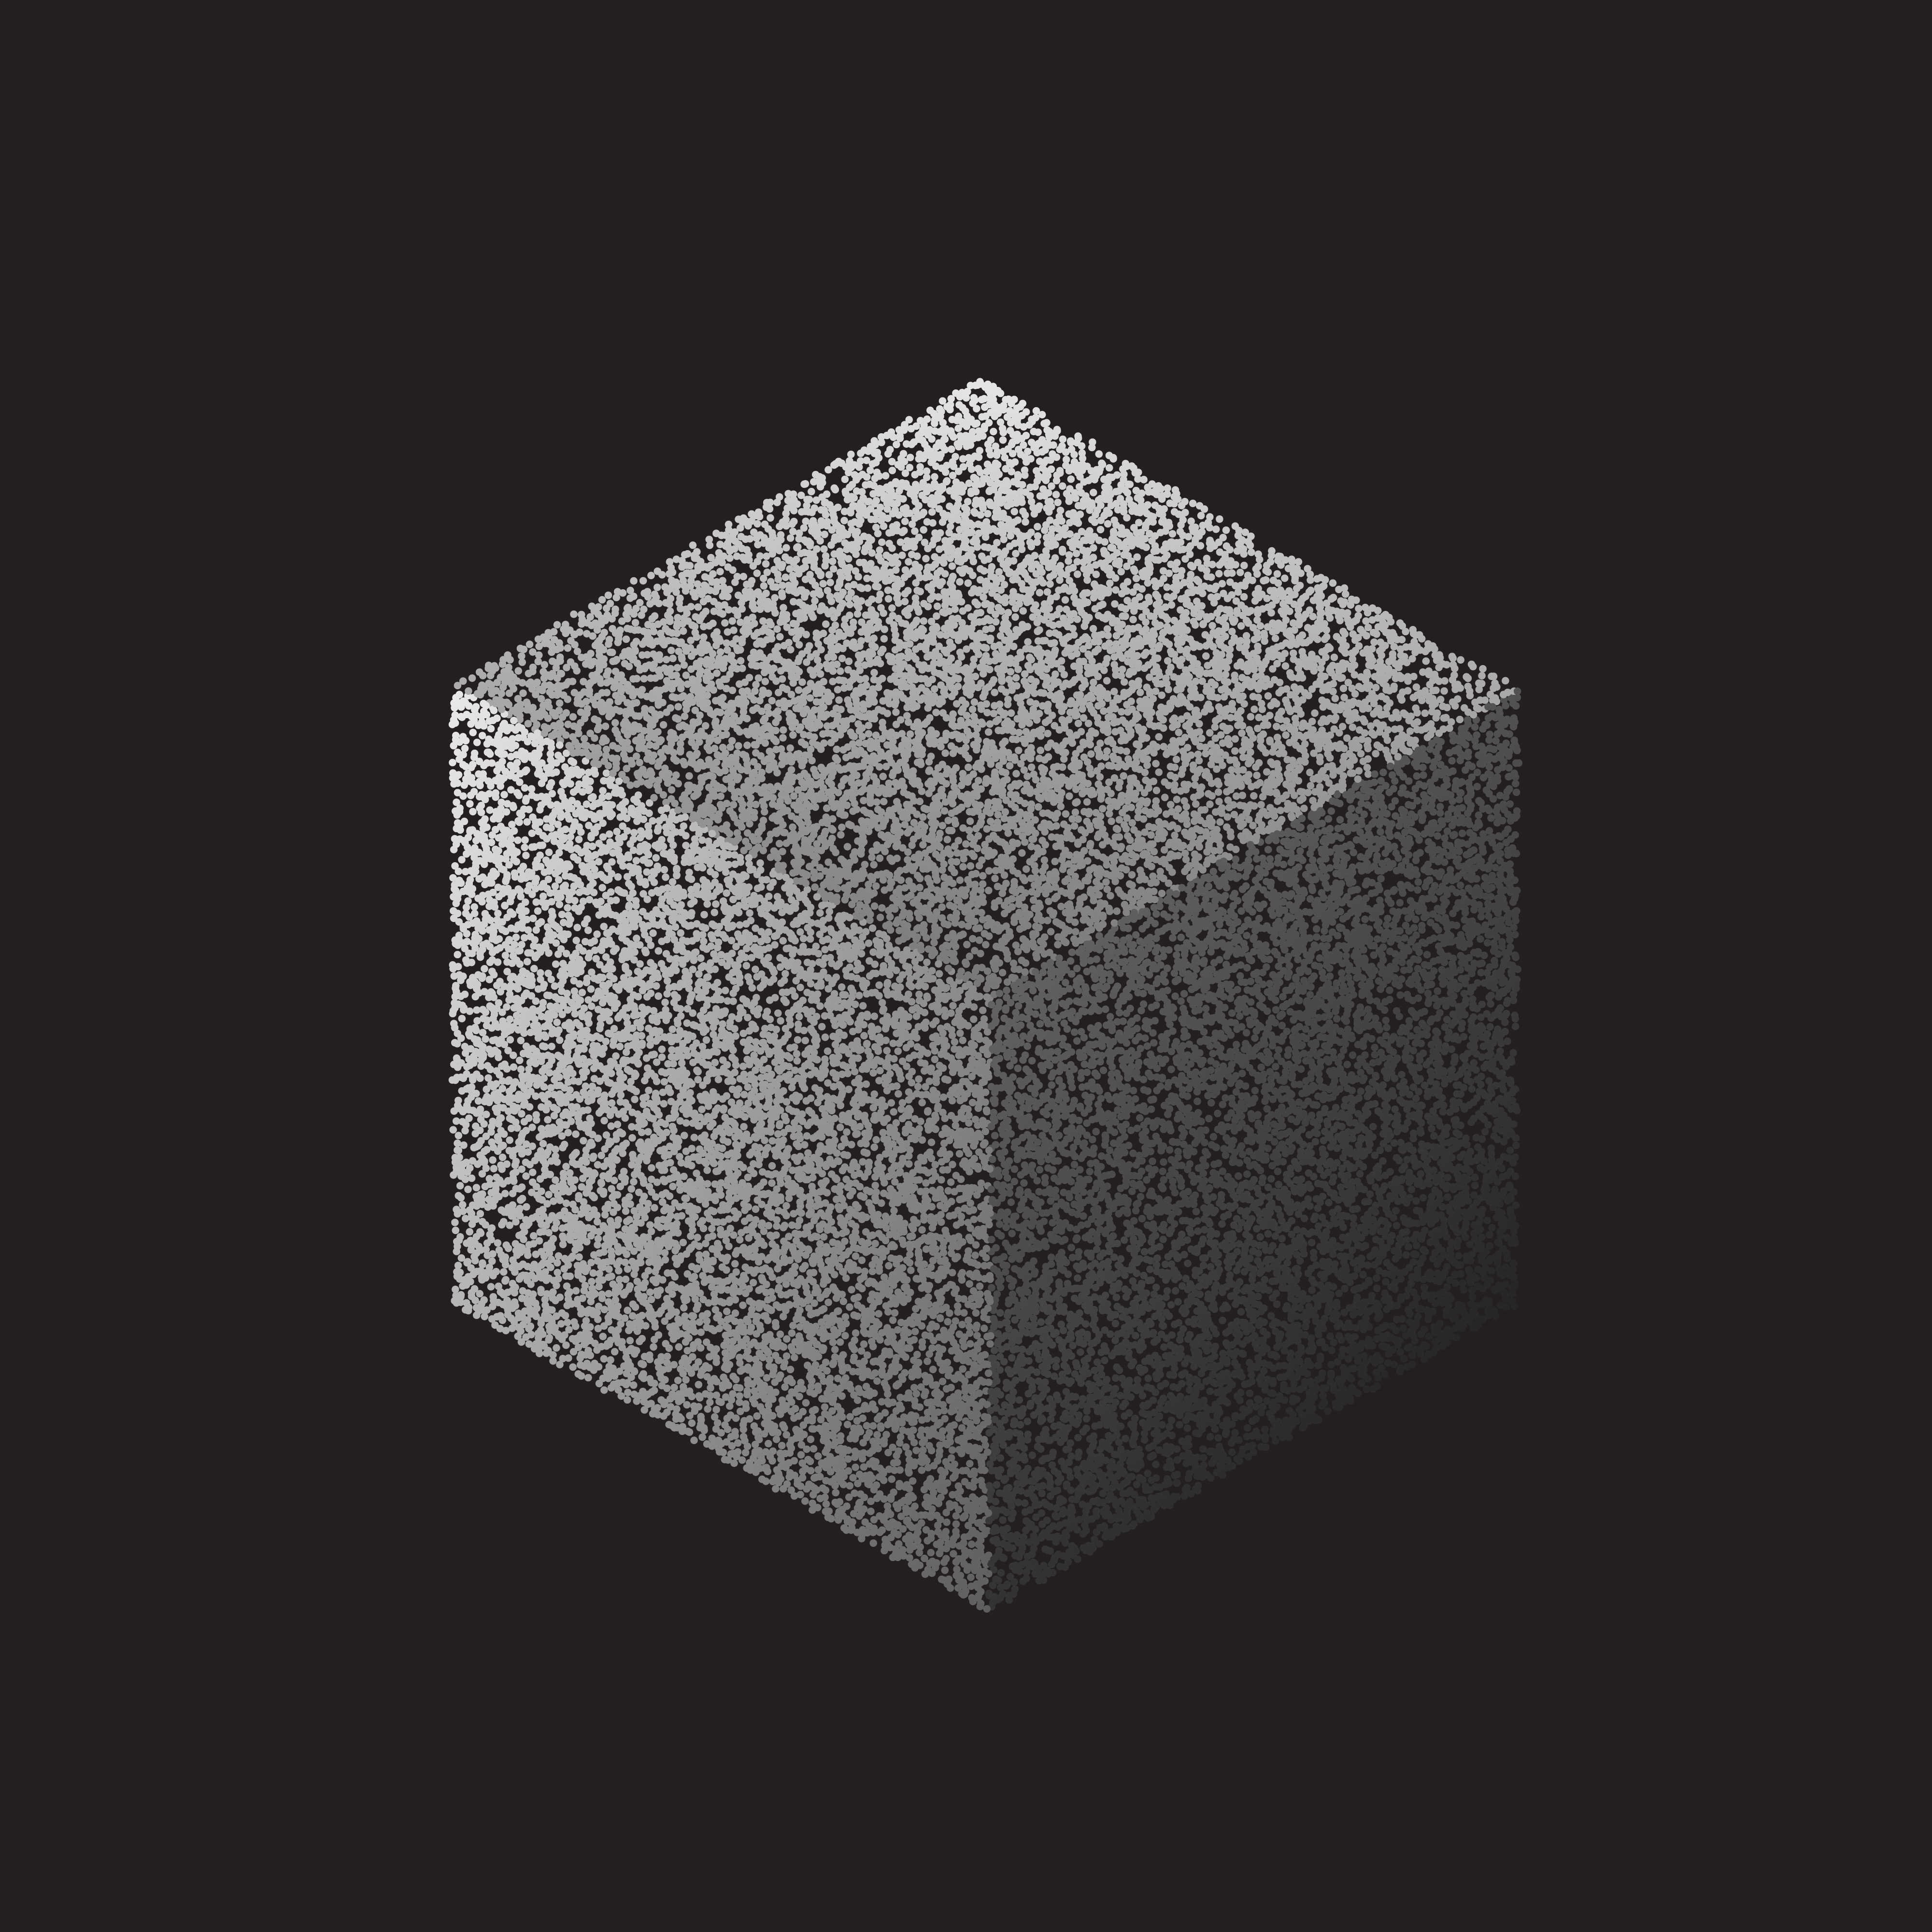 3d-cube-made-with-dots-download-free-vector-art-stock-graphics-images